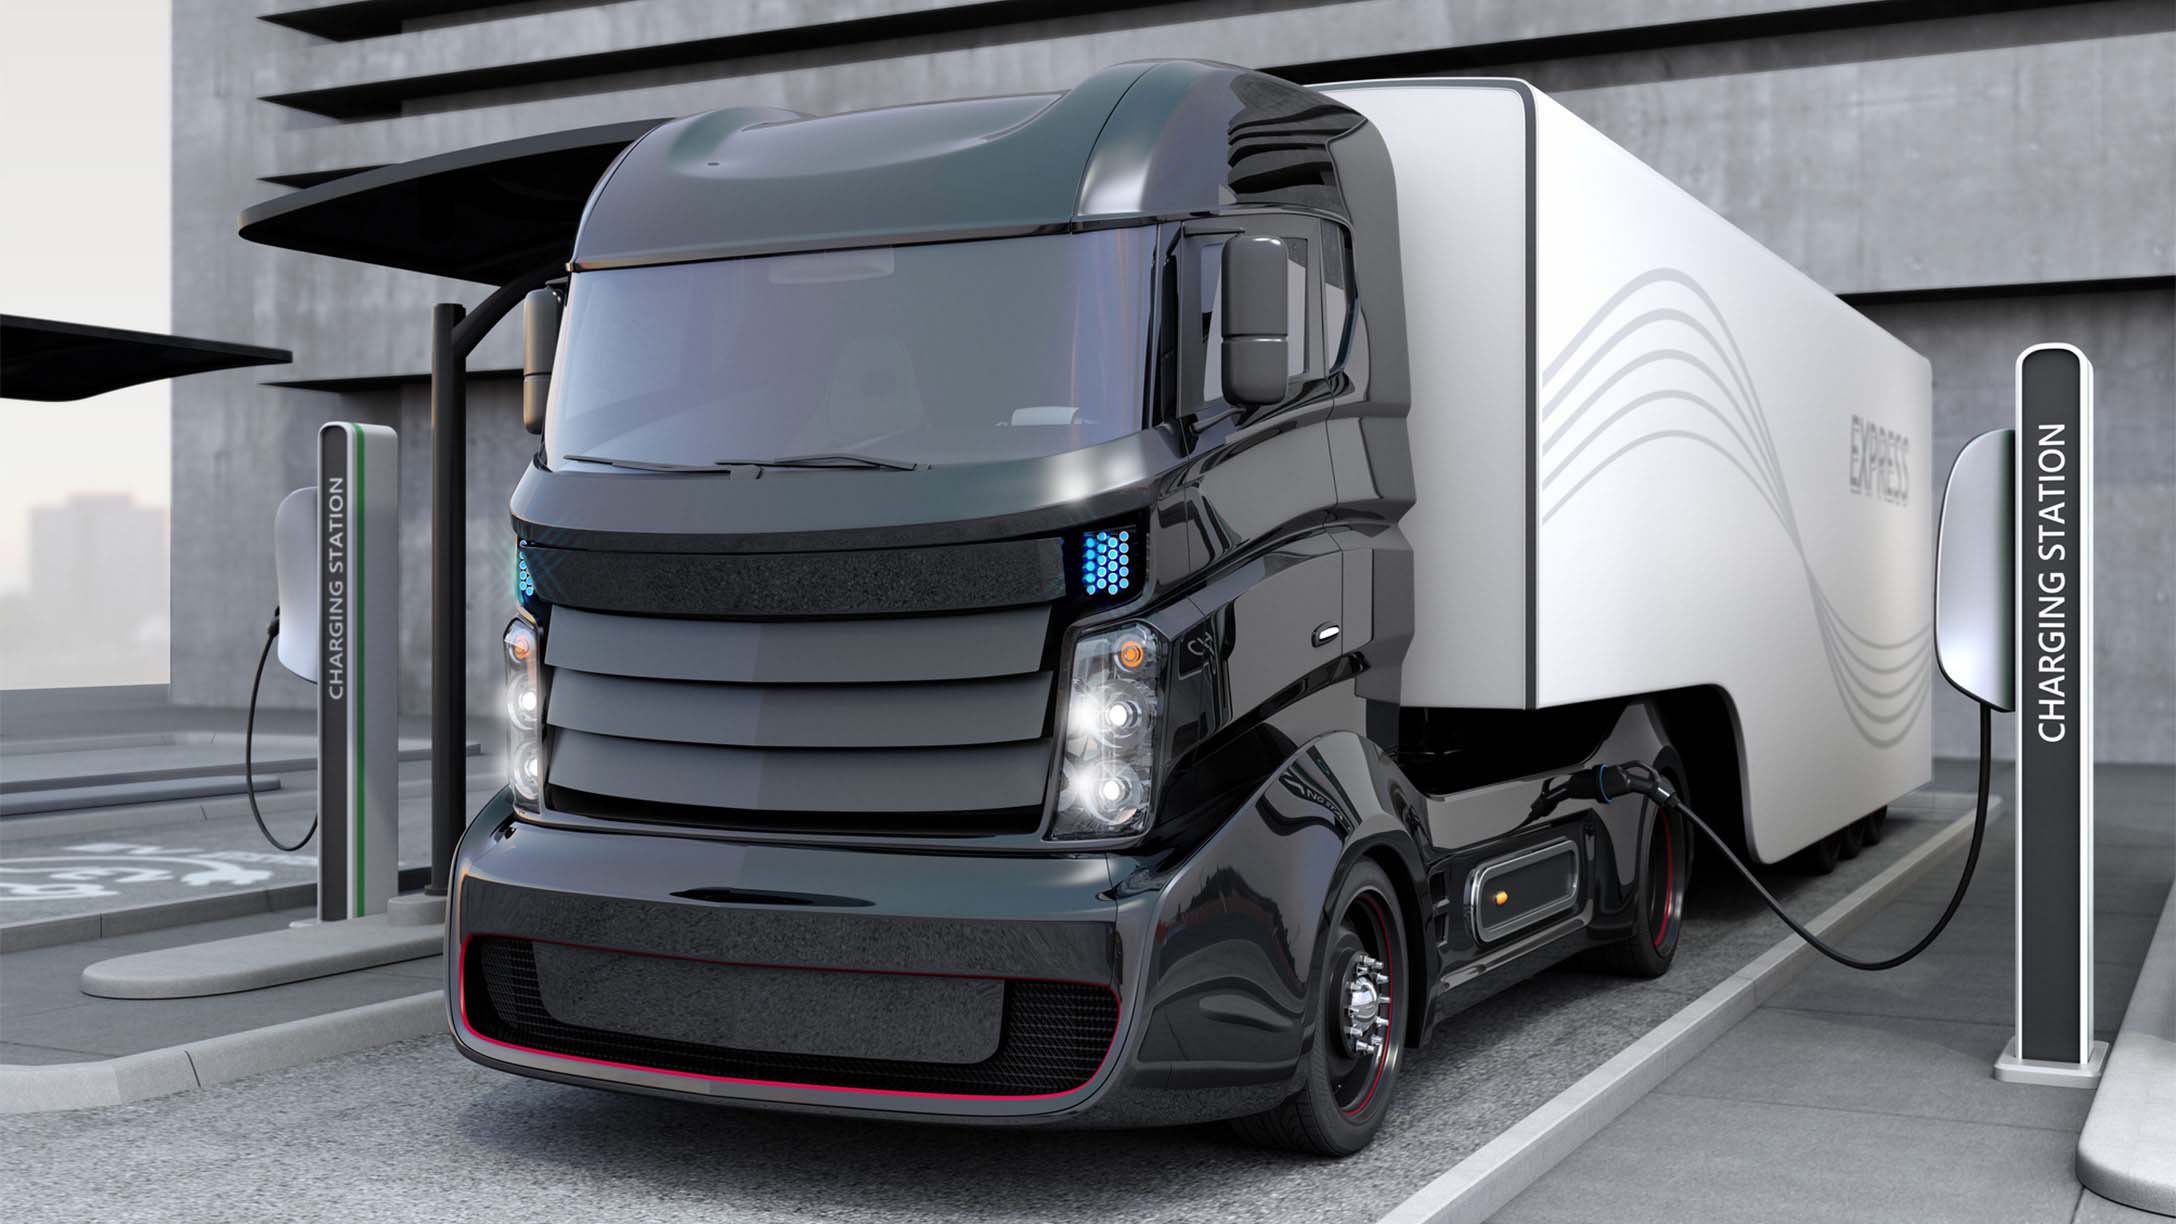 Concept image of electric truck parked at a charging station